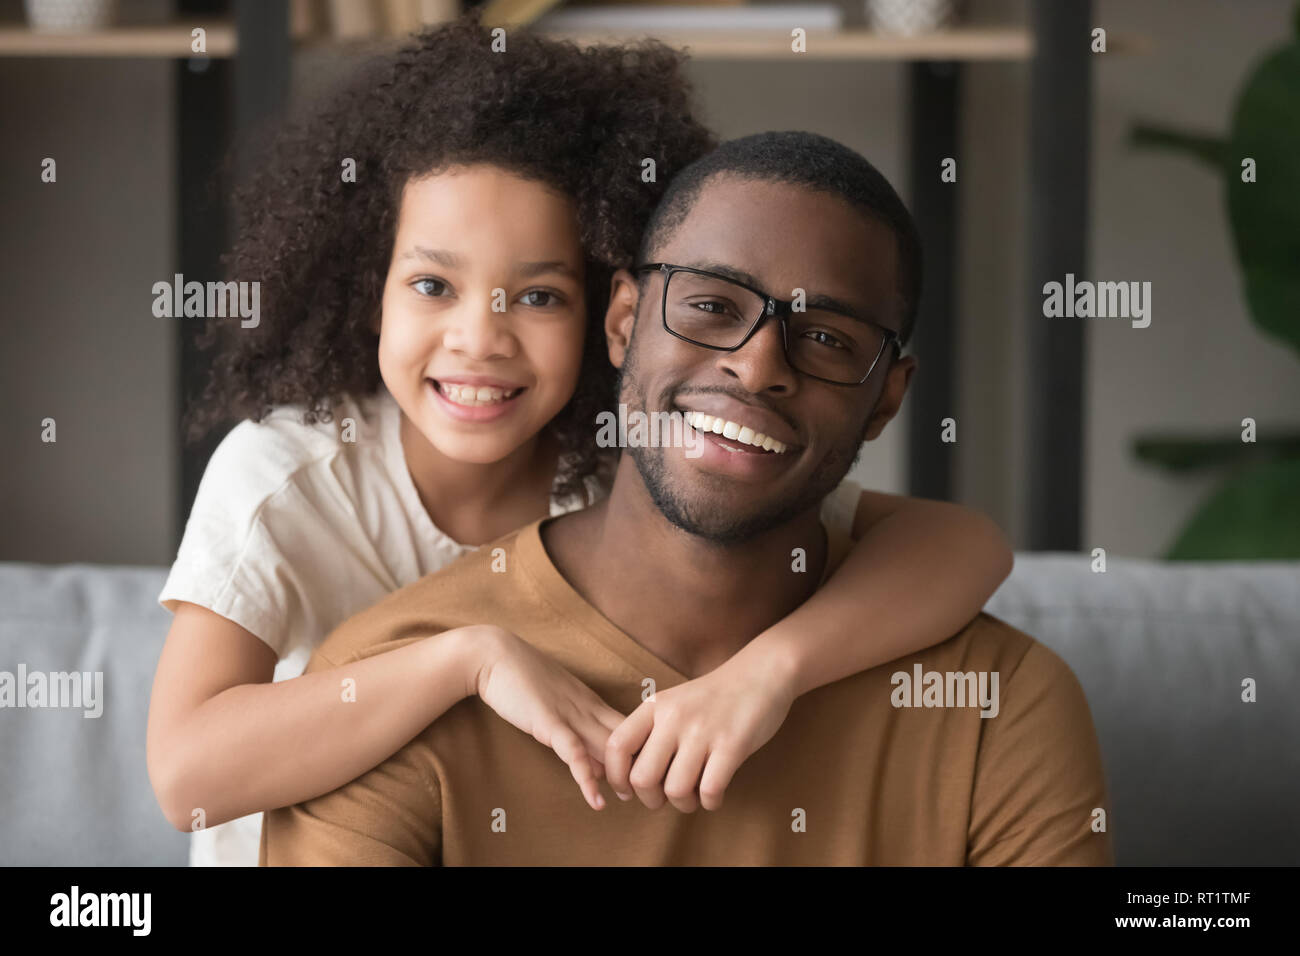 Happy mixed-race preschool girl embracing black father looking at camera Stock Photo